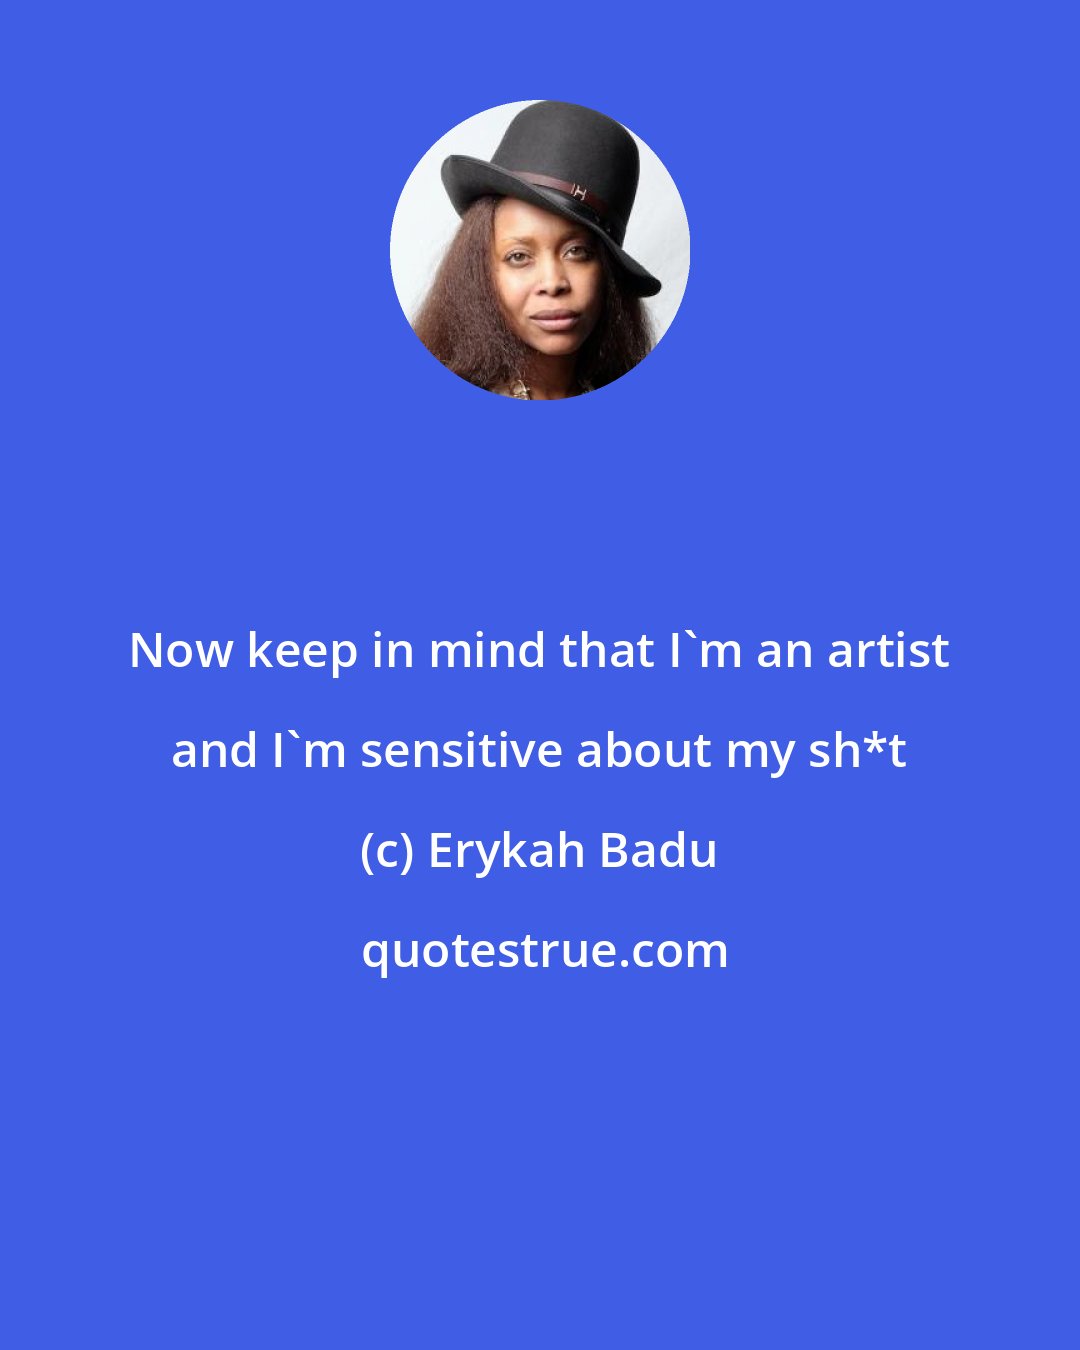 Erykah Badu: Now keep in mind that I'm an artist and I'm sensitive about my sh*t